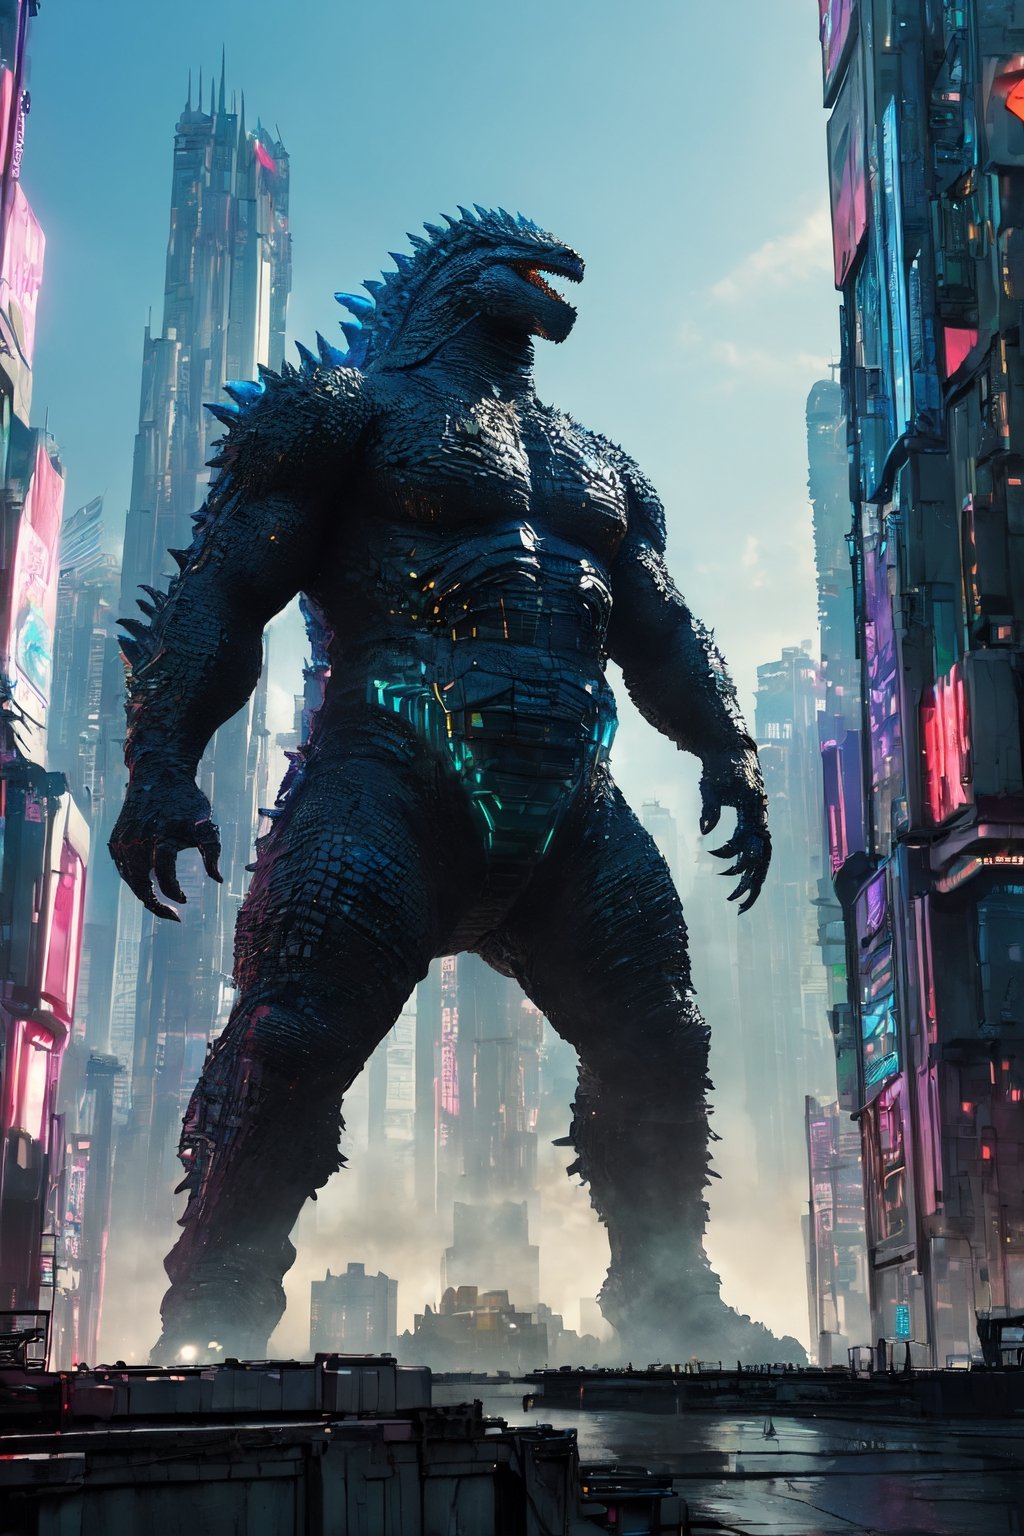 (Masterpiece:1.5), (Best quality:1.5), Cyberpunk style, full body, A towering, majestic Godzilla, towering above the city with scales shimmering in the sunlight. This larger-than-life reptilian creature is depicted in a realistic painting, showcasing its iconic features in intricate detail. The artist expertly captures the creature's immense power and strength, with every scale, claw, and fang meticulously rendered. The image exudes a sense of awe and wonder, drawing viewers into the fantastical world of this legendary monster.